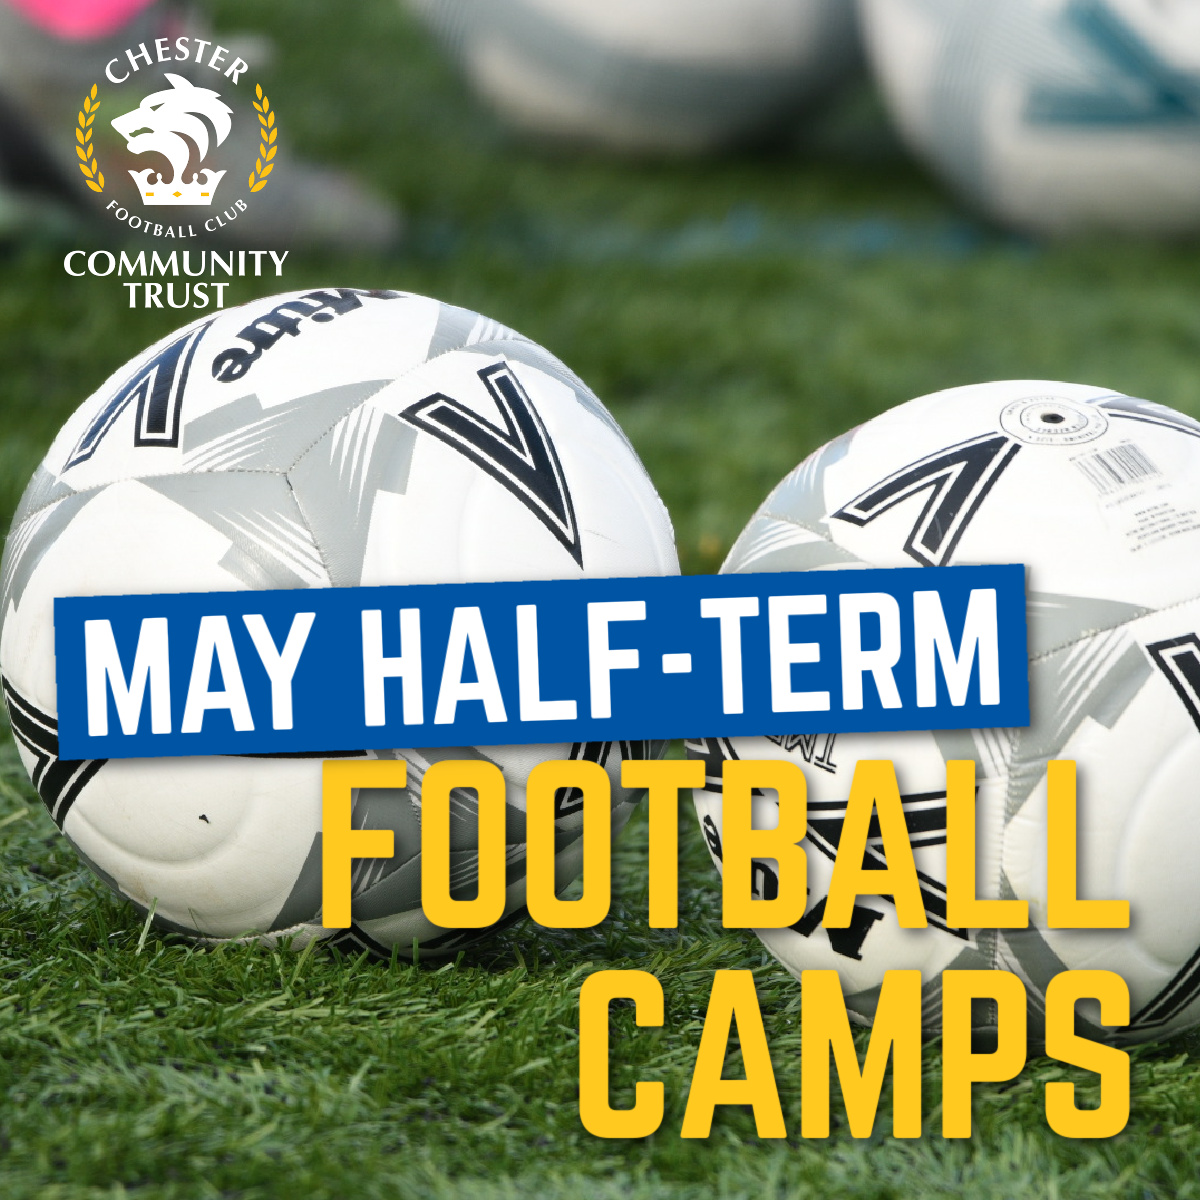 ⌛ Not long now until May half-term... There's still time to book your place for our Chester FC Soccer School, Goalkeeping Camp and Girls Soccer School! ⚽ Sign up ➡️ bit.ly/3xVD12D